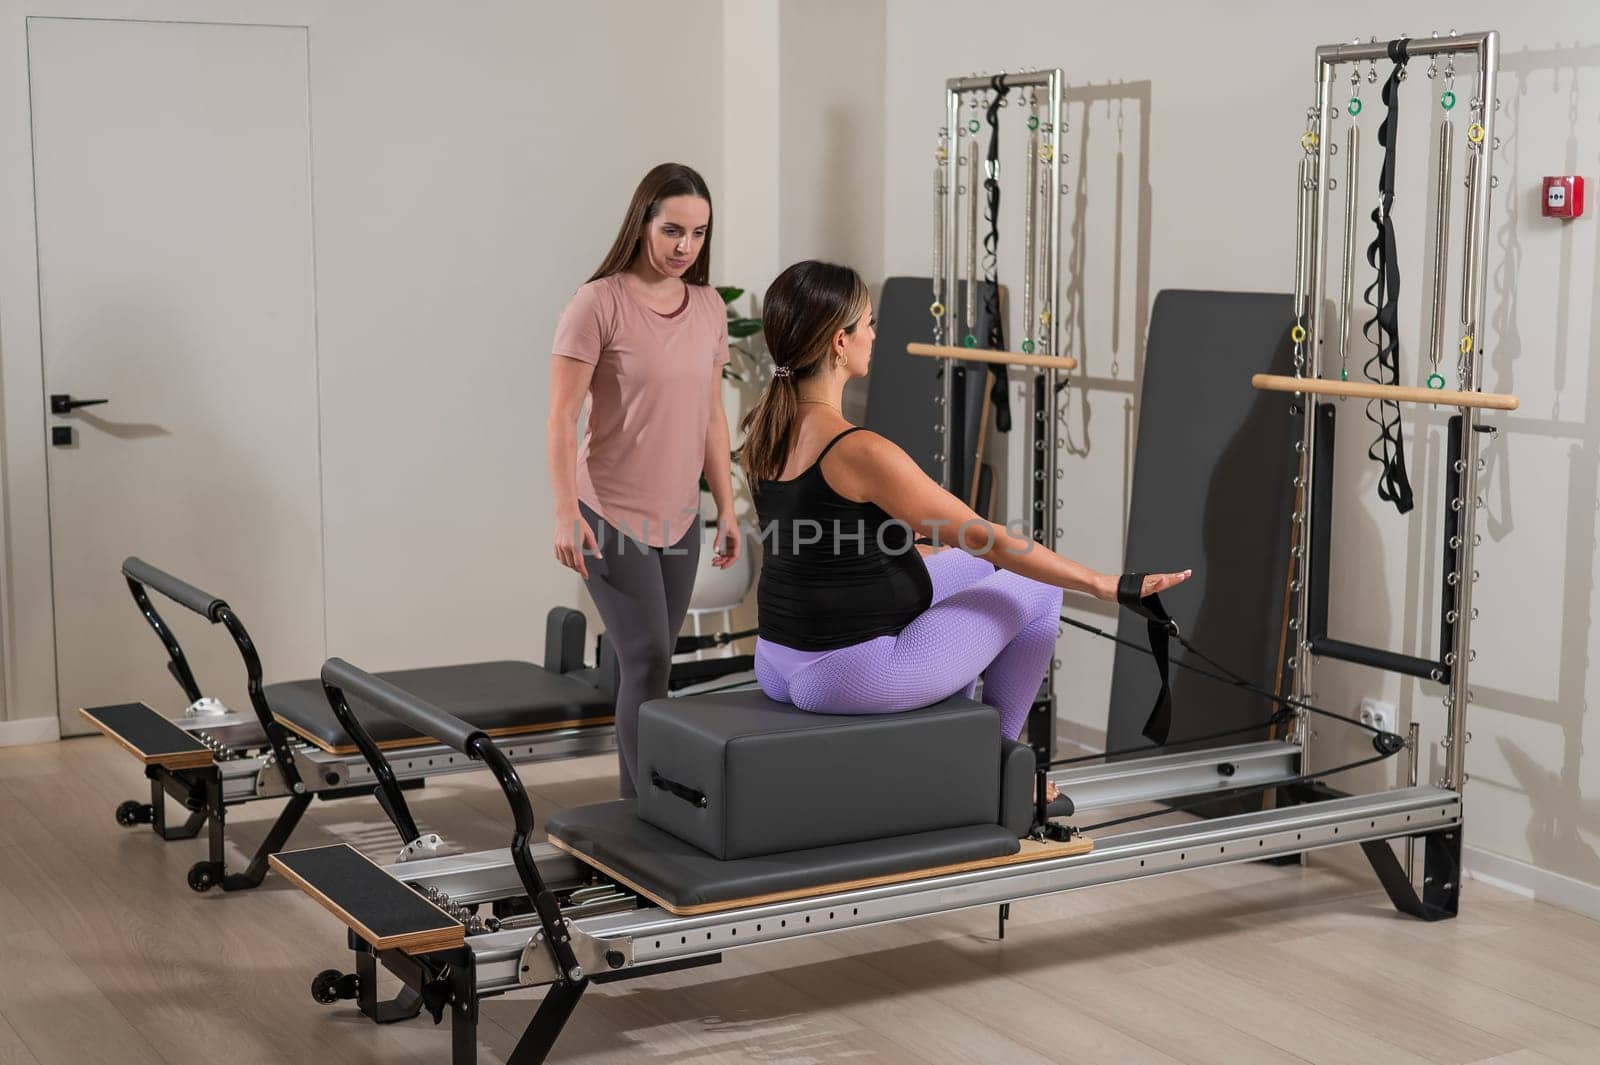 Caucasian pregnant woman doing Pilates exercises on a reformer machine with an individual trainer